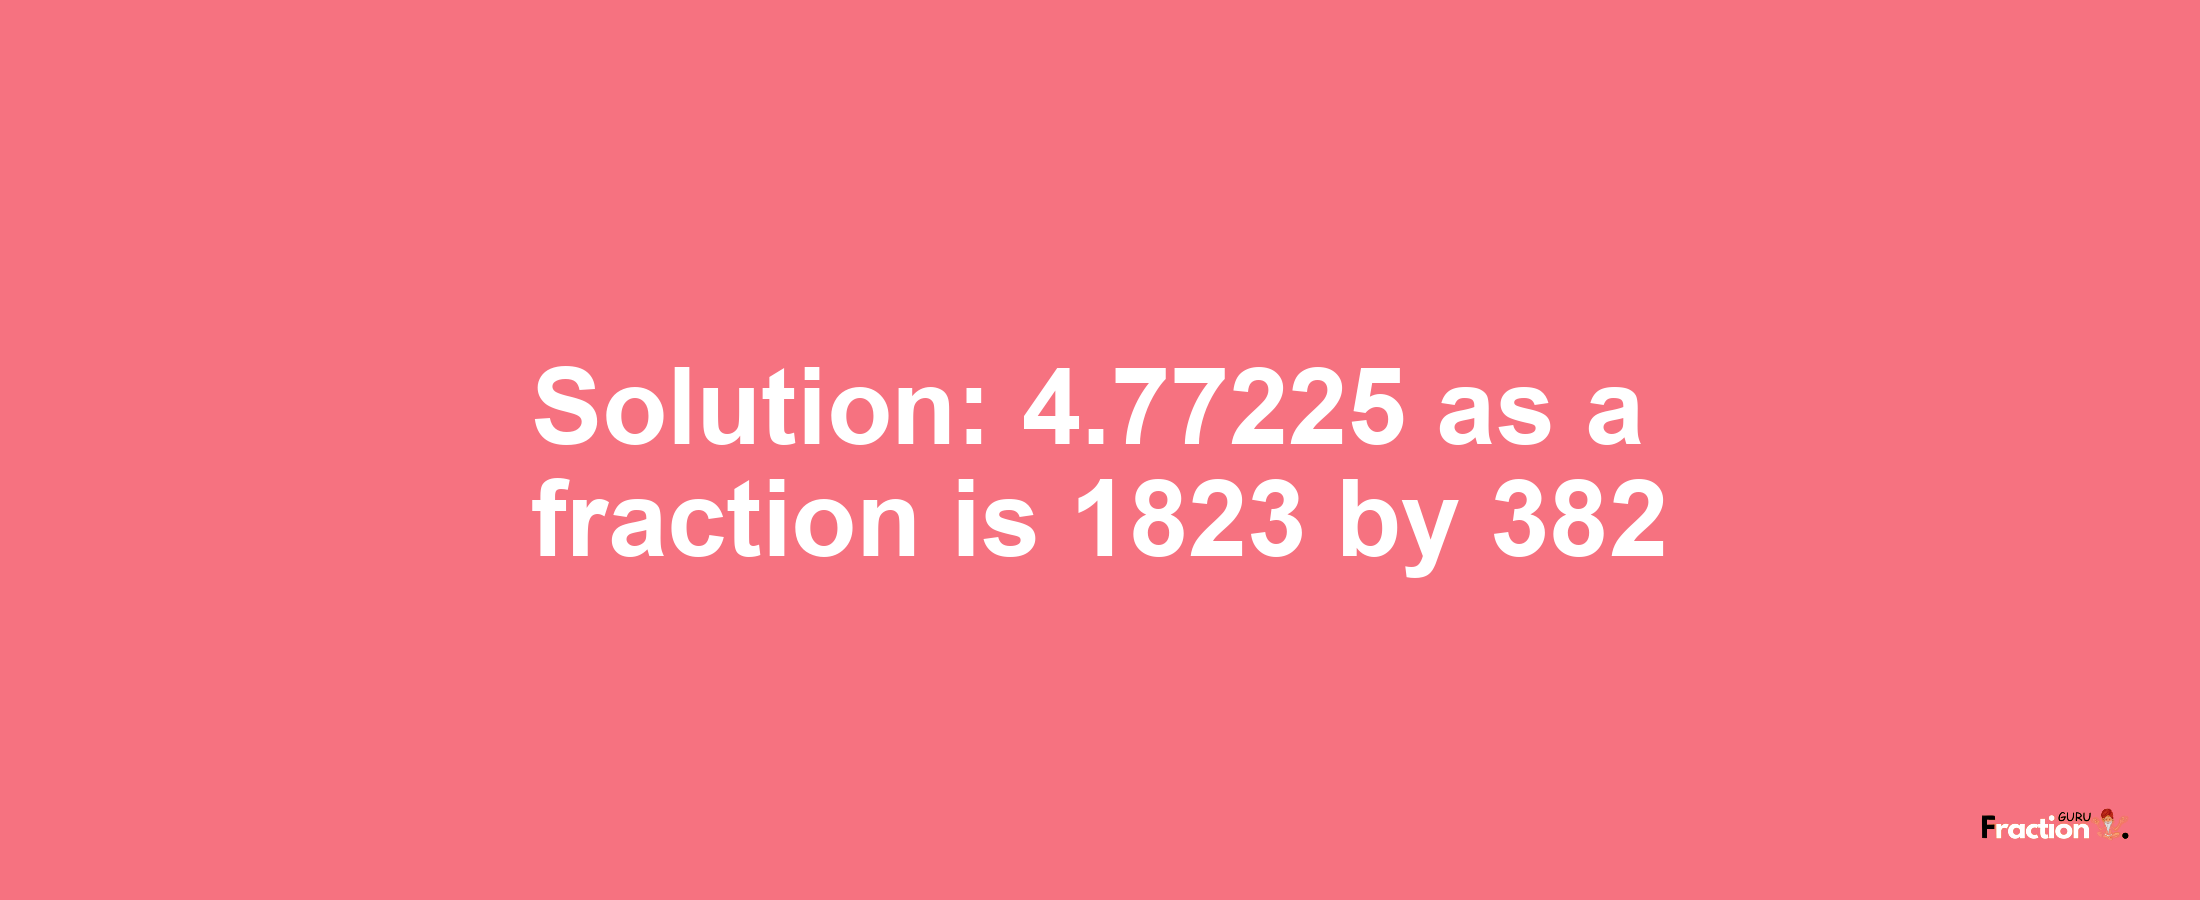 Solution:4.77225 as a fraction is 1823/382